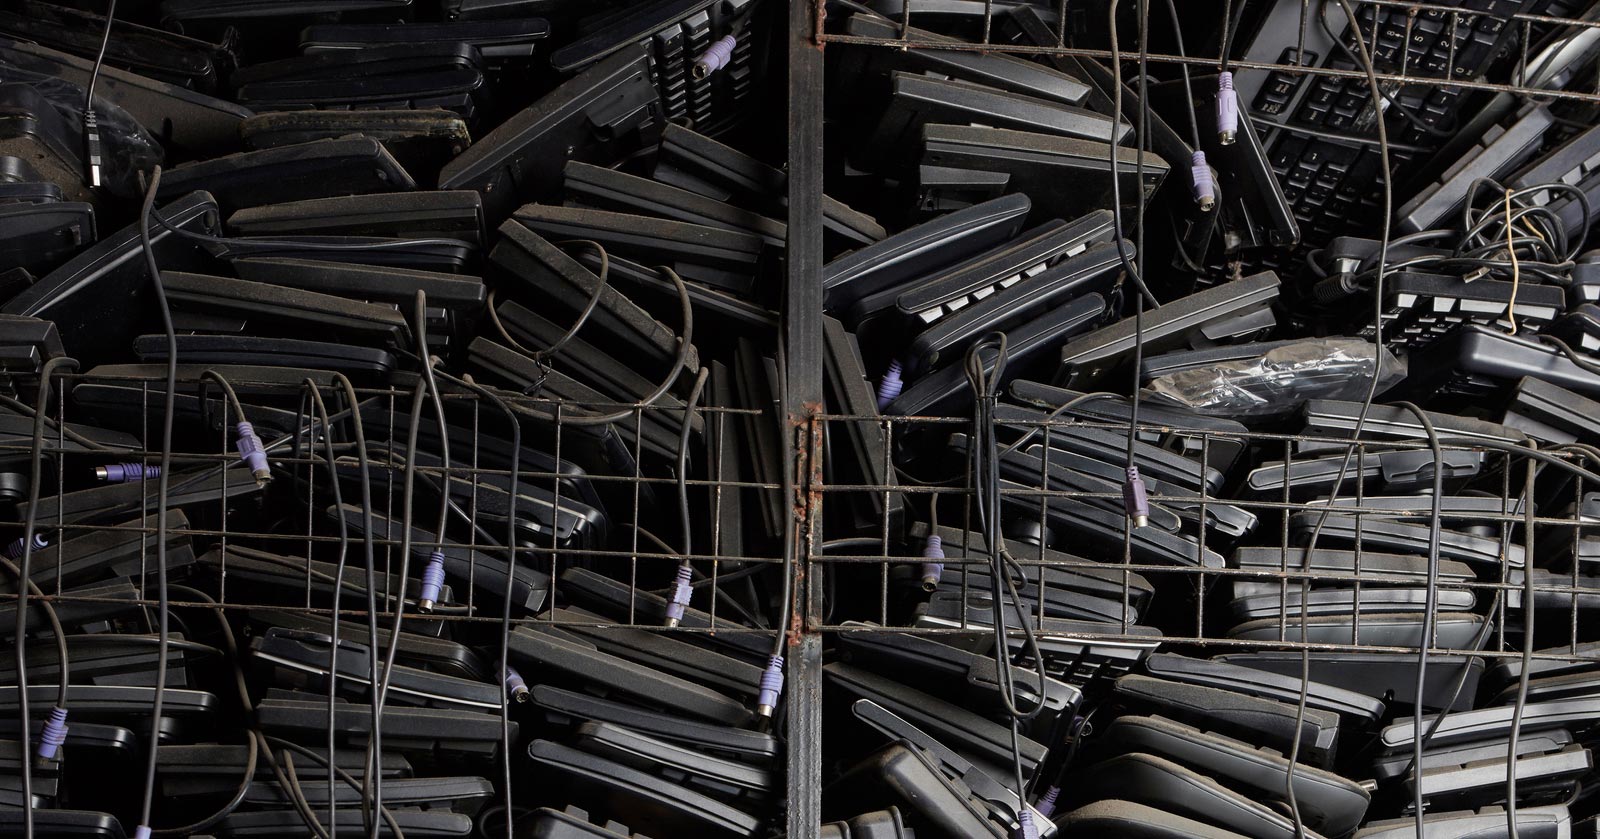 It’s time for Asia’s IT buyers to get serious about e-waste